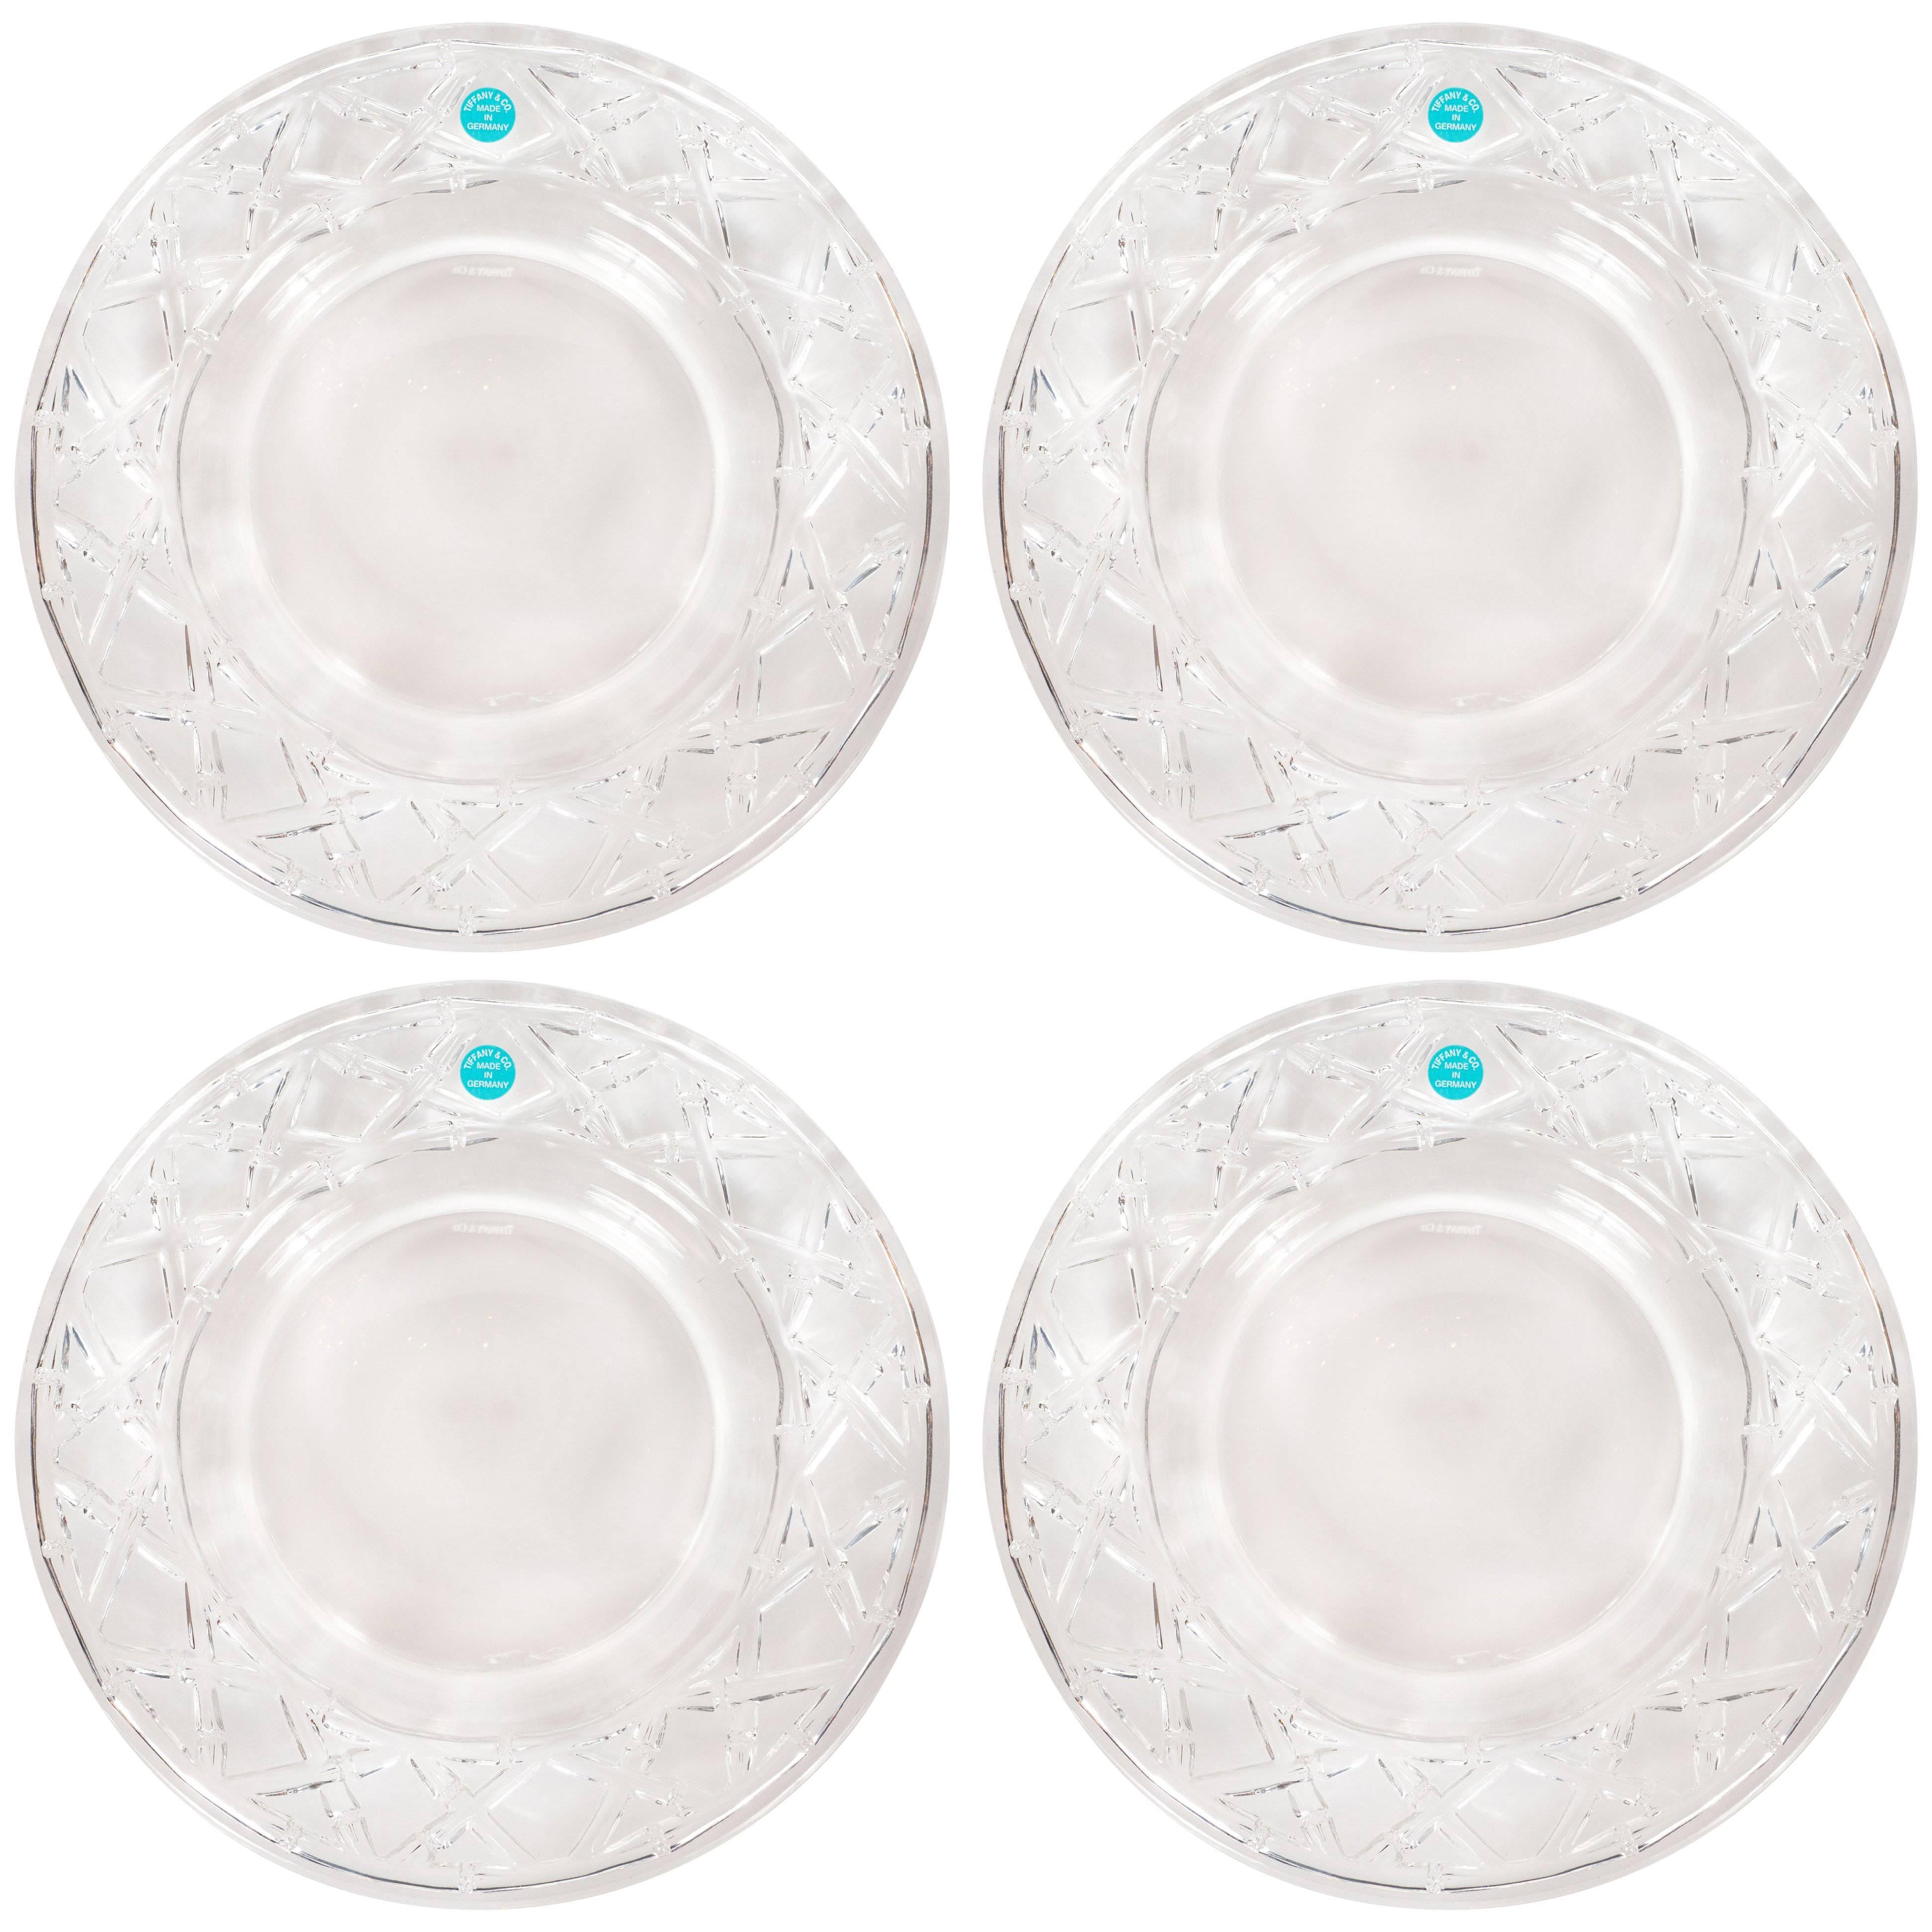 Set of Four Glass Basketweave Dessert/Hors D'oeuvres Plates by Tiffany & Co.